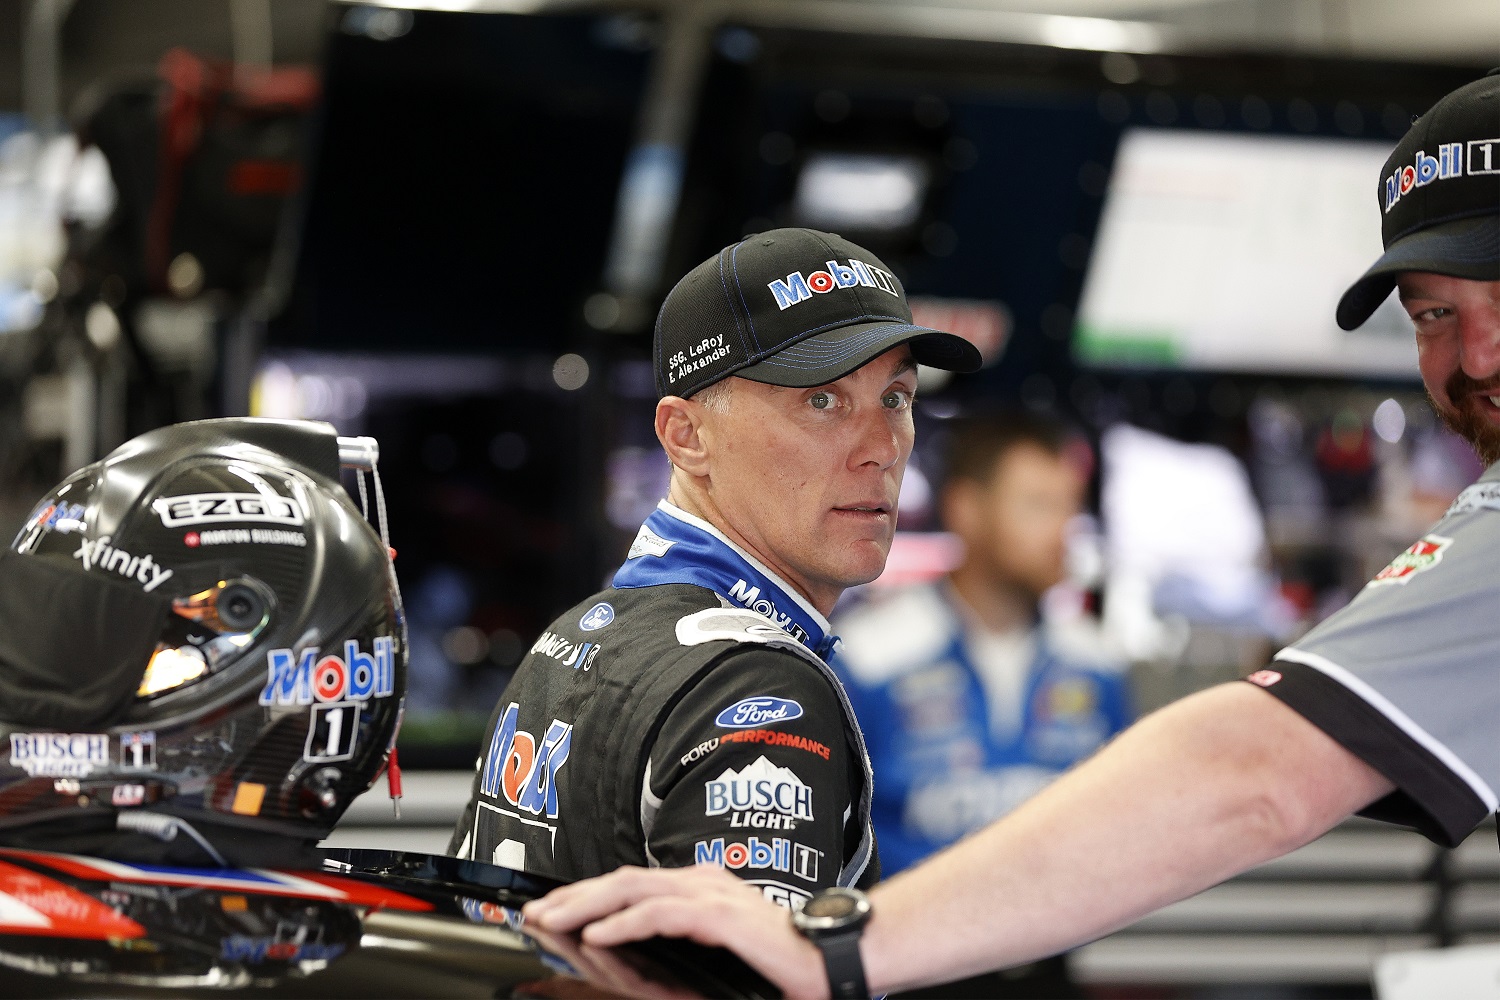 Kevin Harvick, driver of the No. 4 Ford, waits in the garage area during practice for the NASCAR Cup Series Coca-Cola 600 at Charlotte Motor Speedway on May 28, 2021.